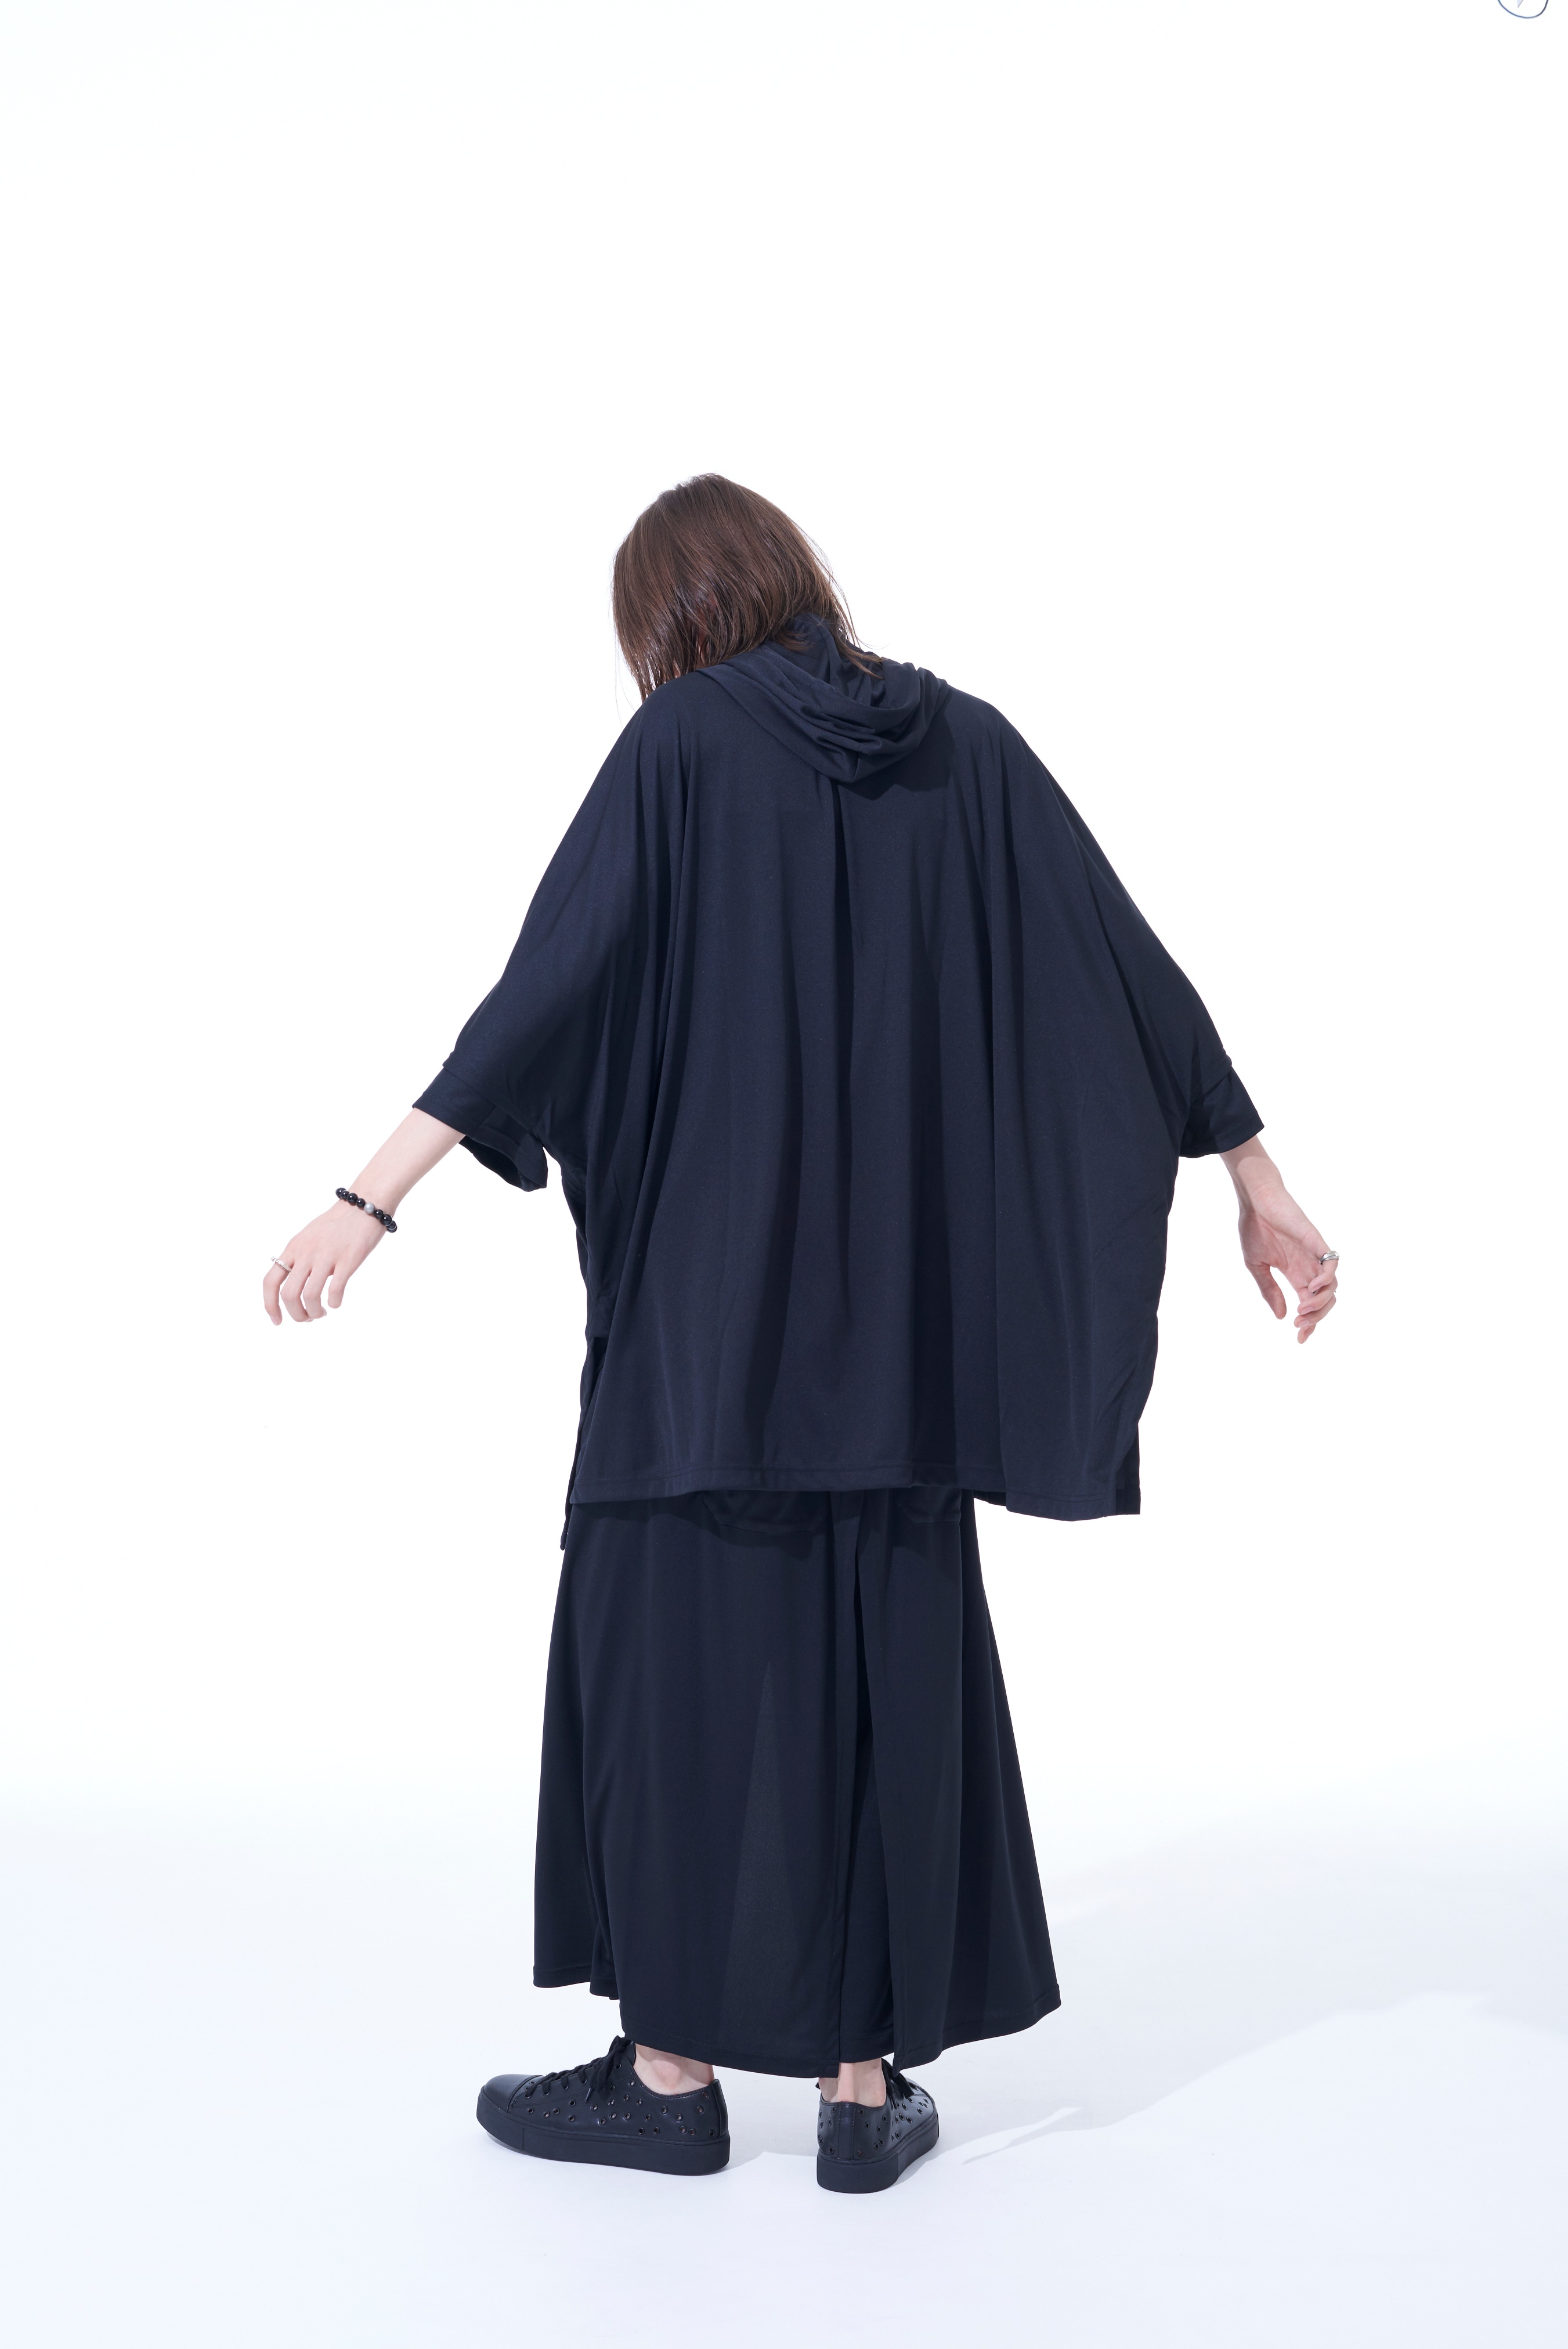 HIGH-GAUGE POLYESTER SMOOTH JERSEY HOODIE PONCHO